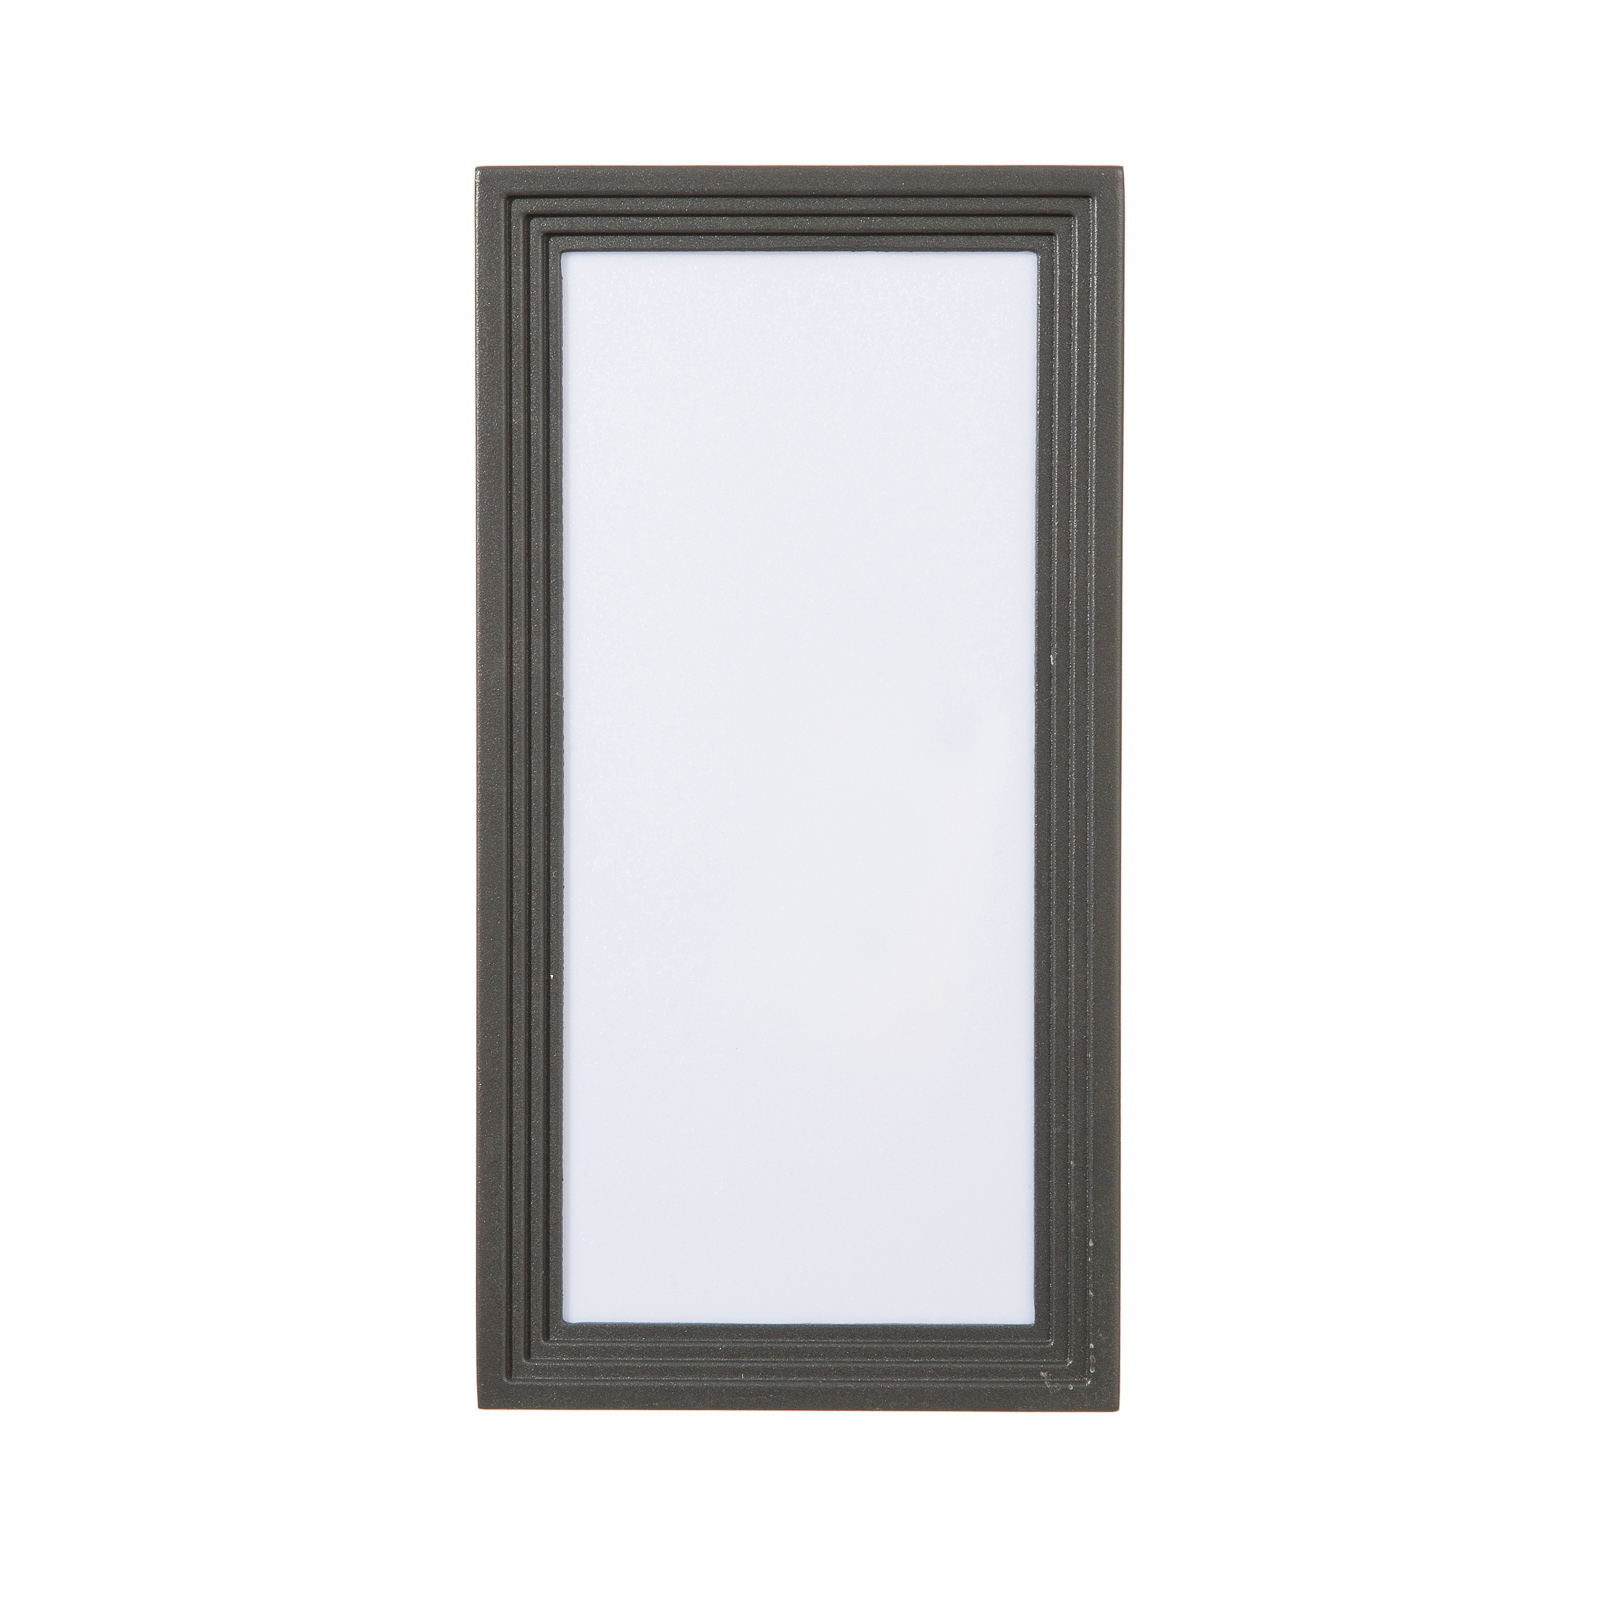 Timok LED outdoor wall light, anthracite